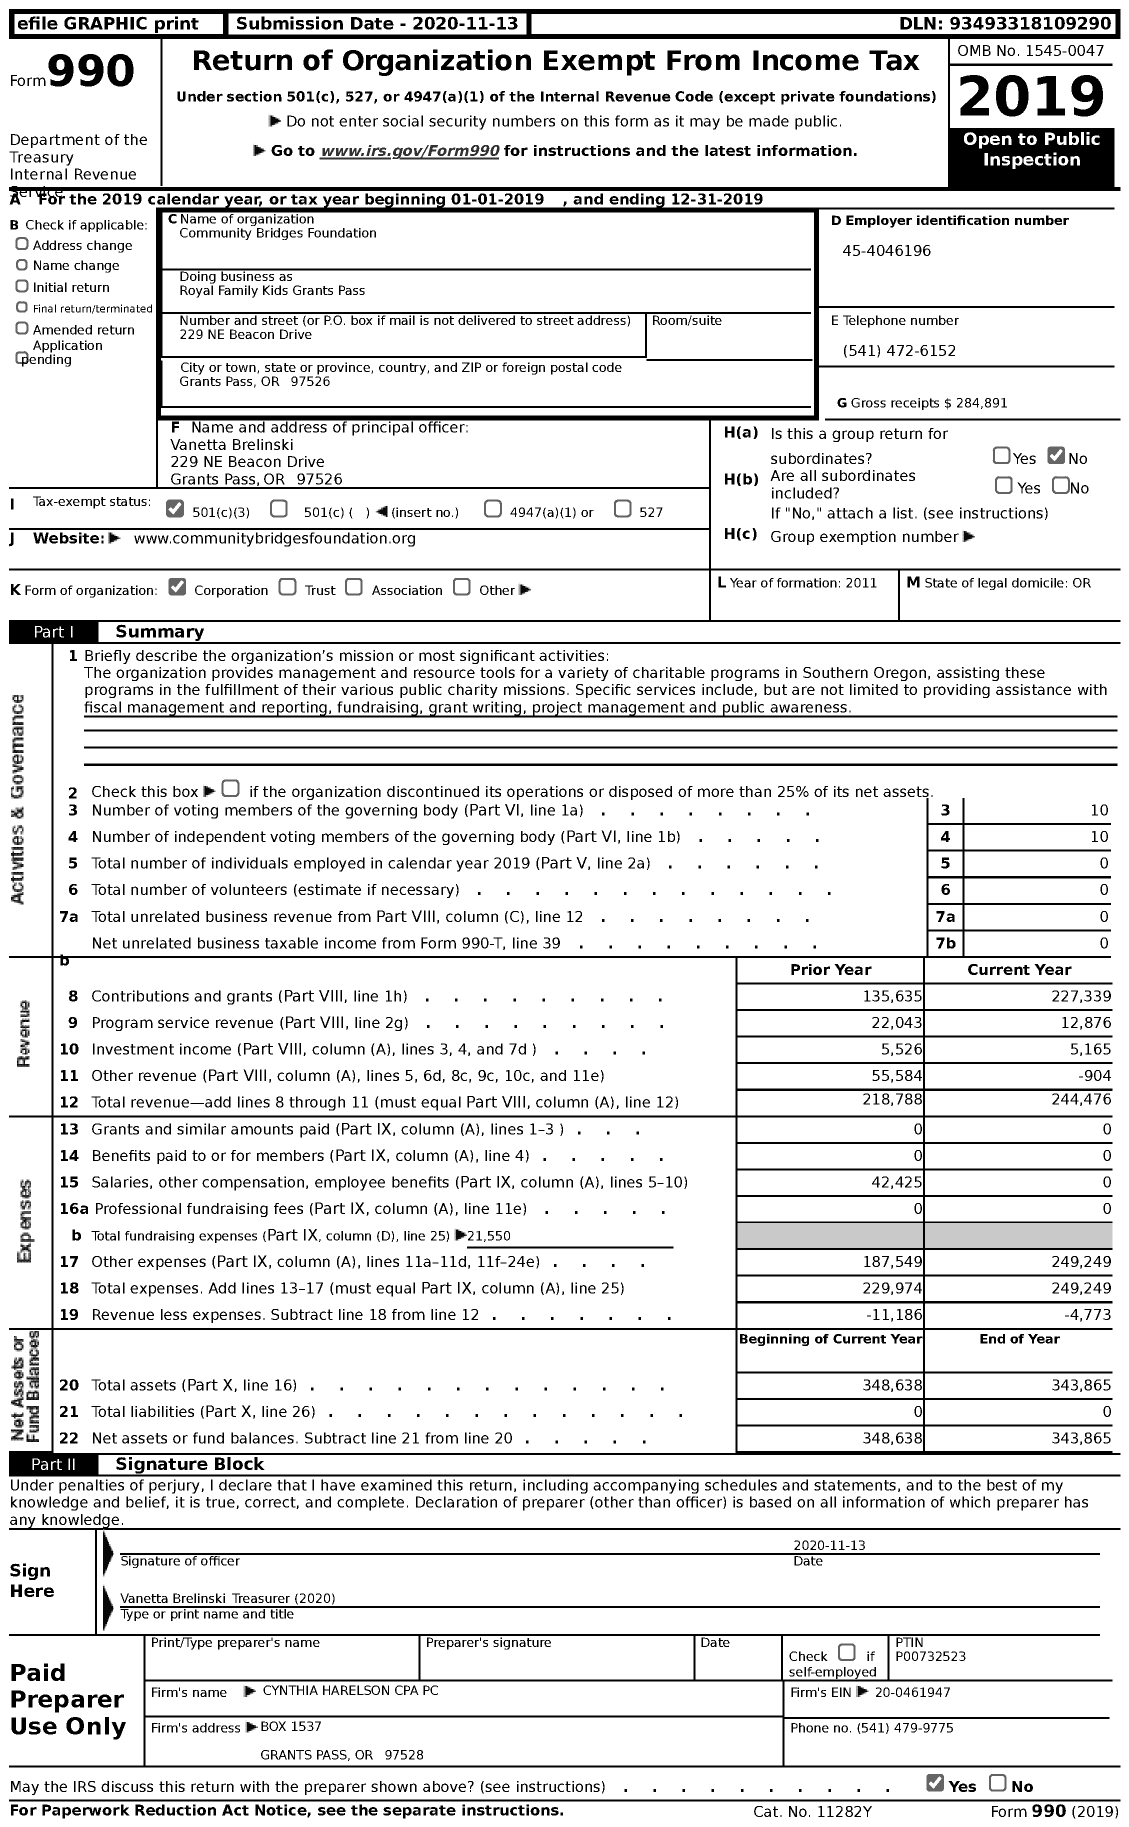 Image of first page of 2019 Form 990 for Royal Family Kids Grants Pass